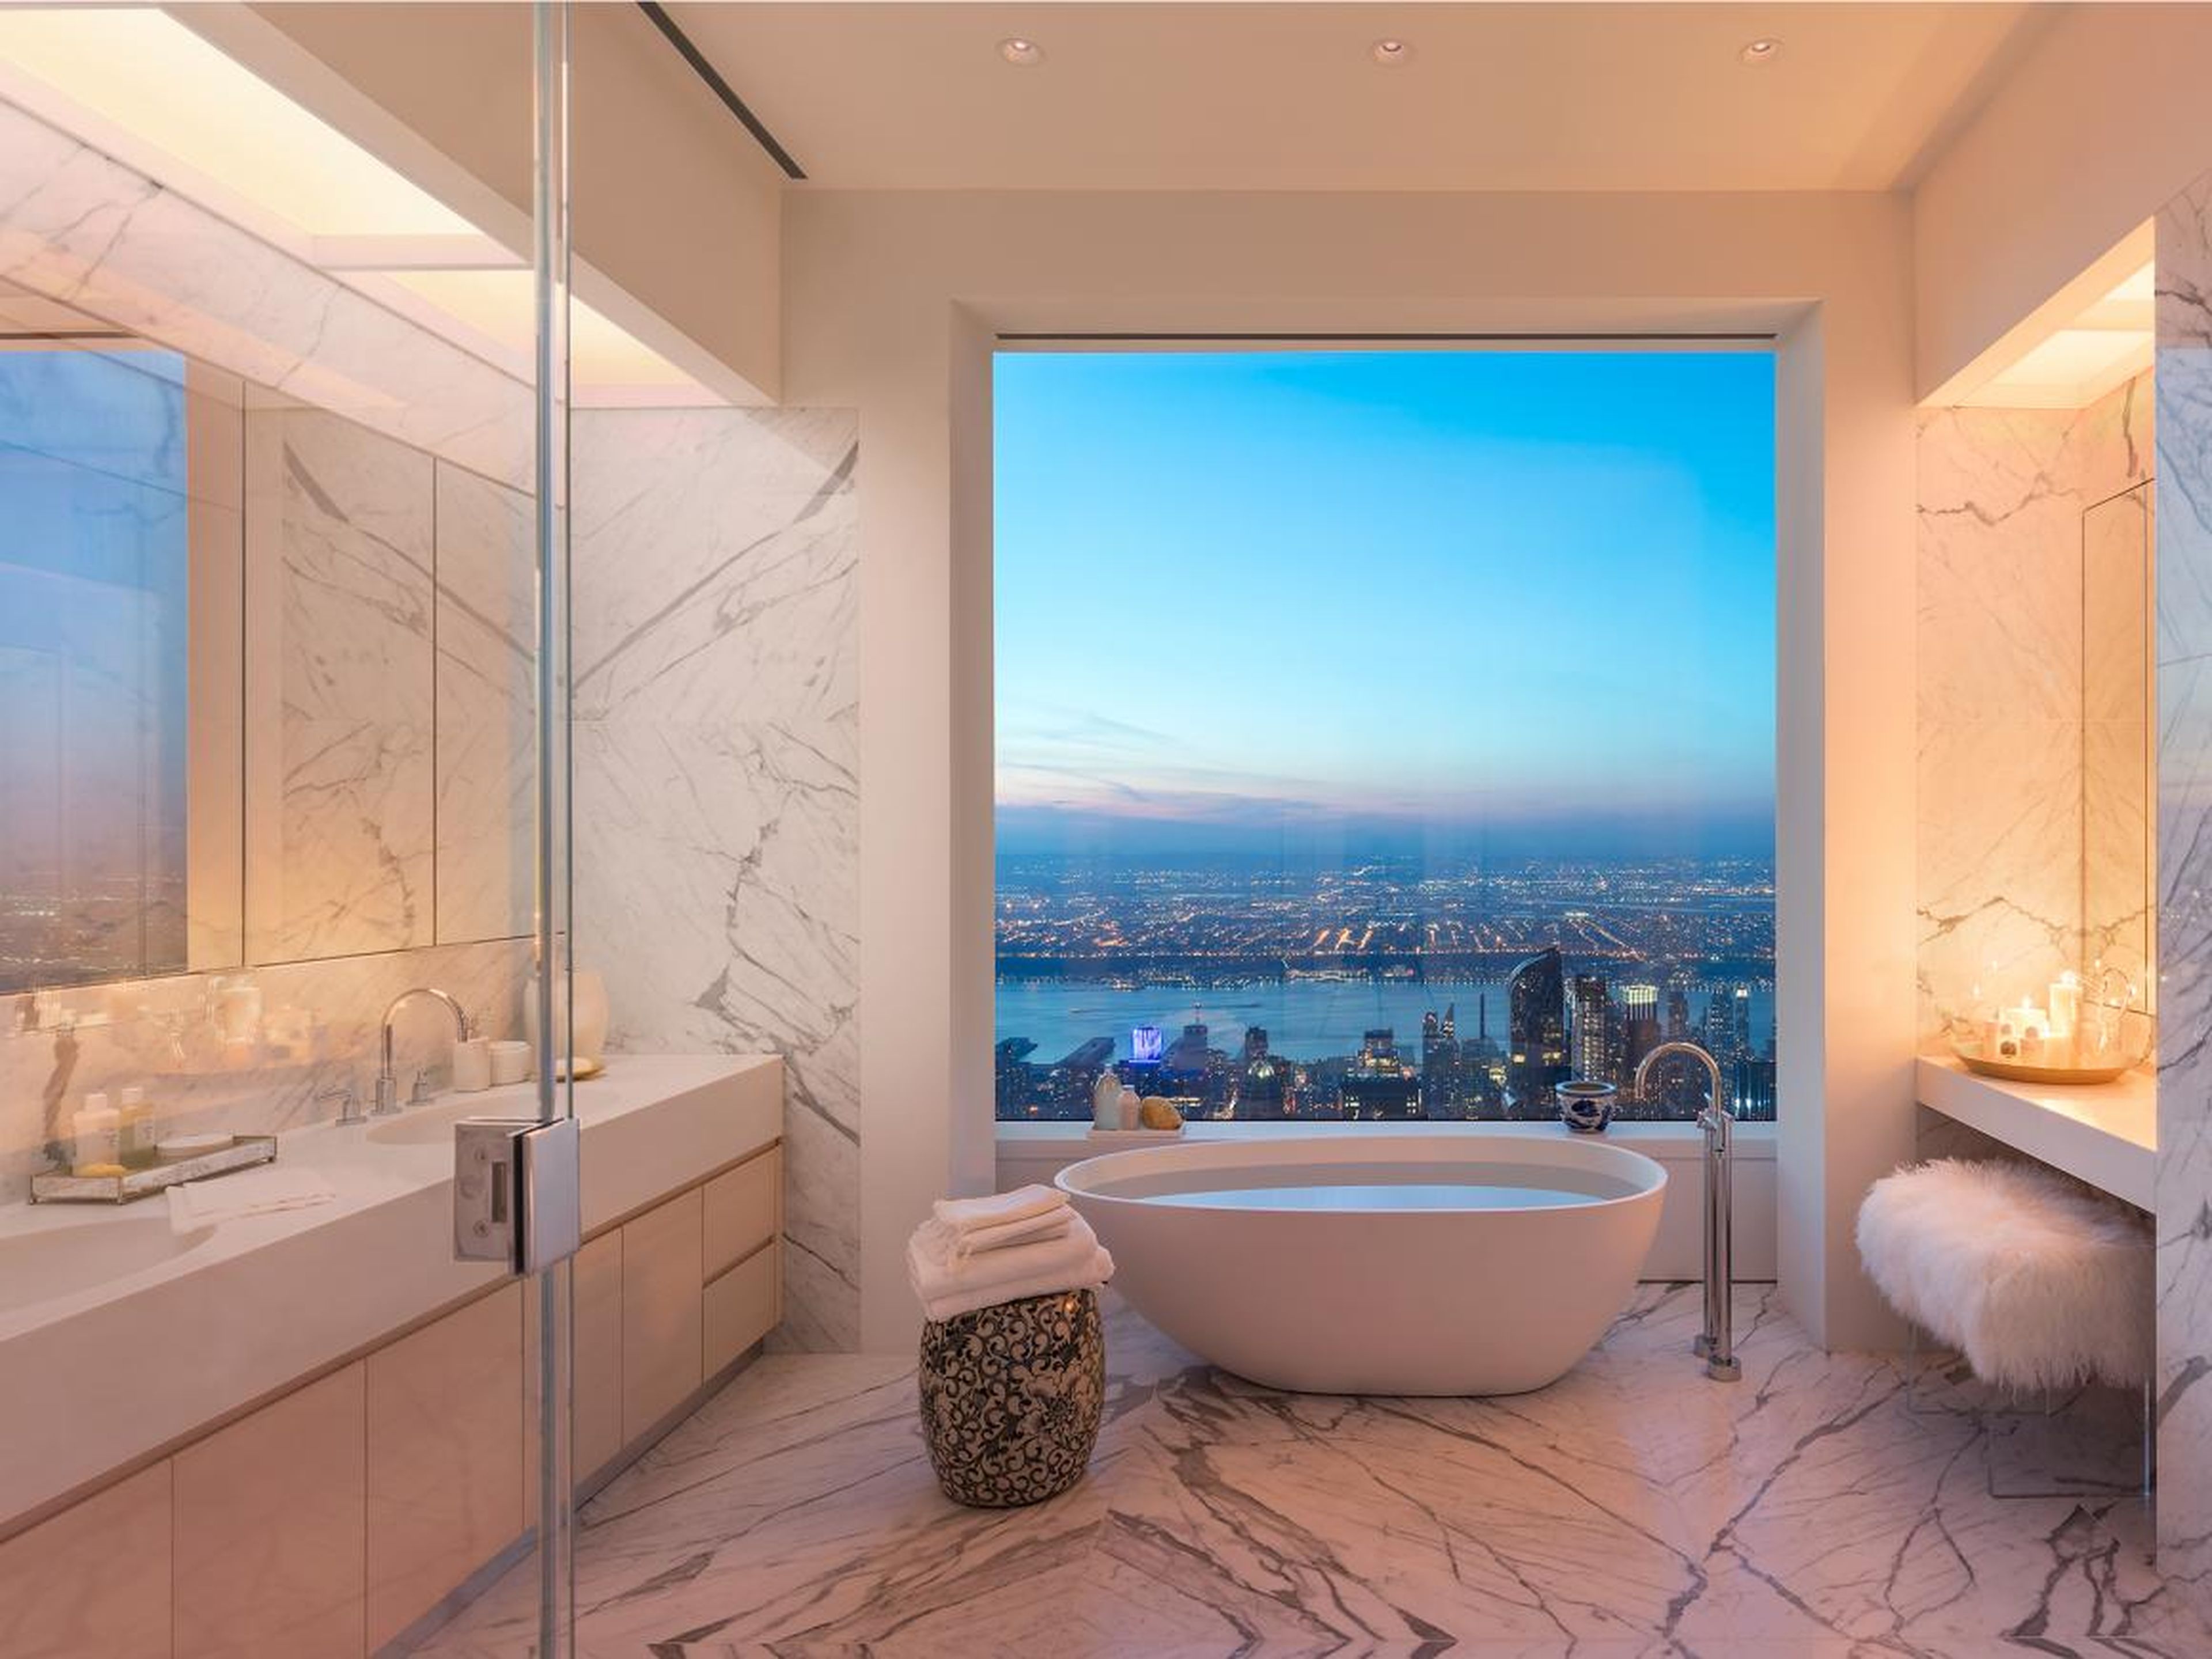 The luxurious master bathroom had marble floors and walls, cubic marble vanities with 22-inch oval sinks, custom wood cabinets, a large freestanding soaking tub, a shower, heated floors — and eye-popping views of the city.